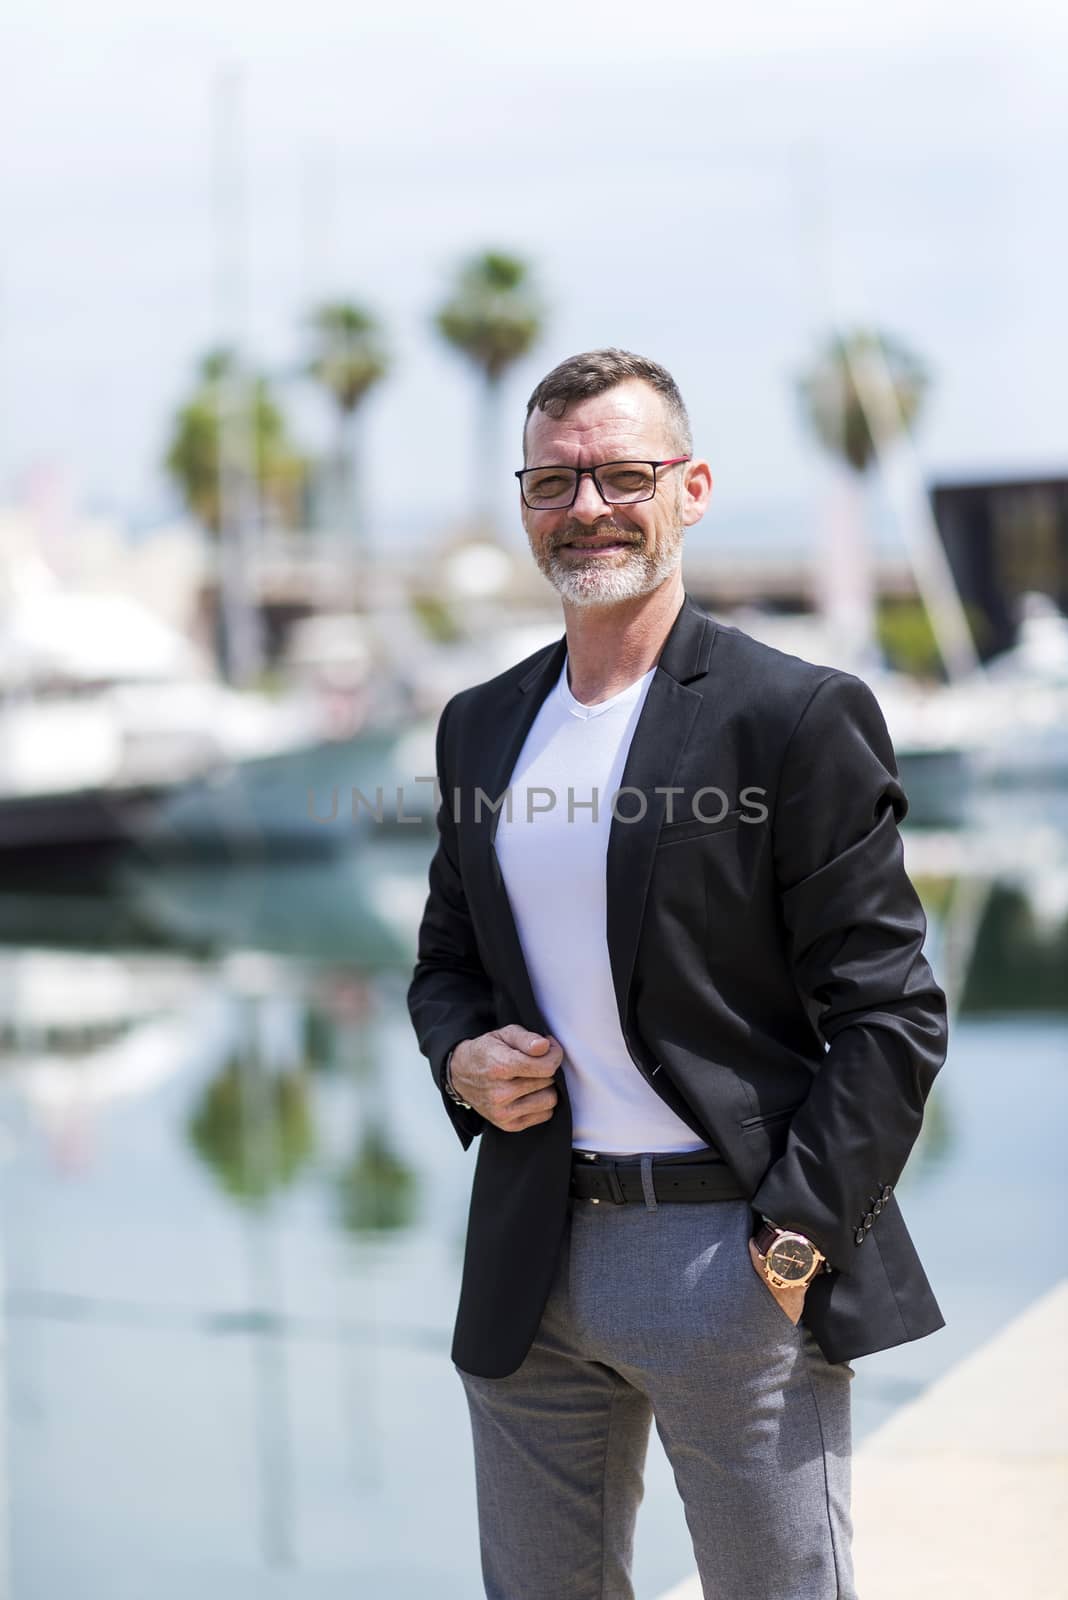 Businessman standing in the city hand on pocket while looking camera and smiling.